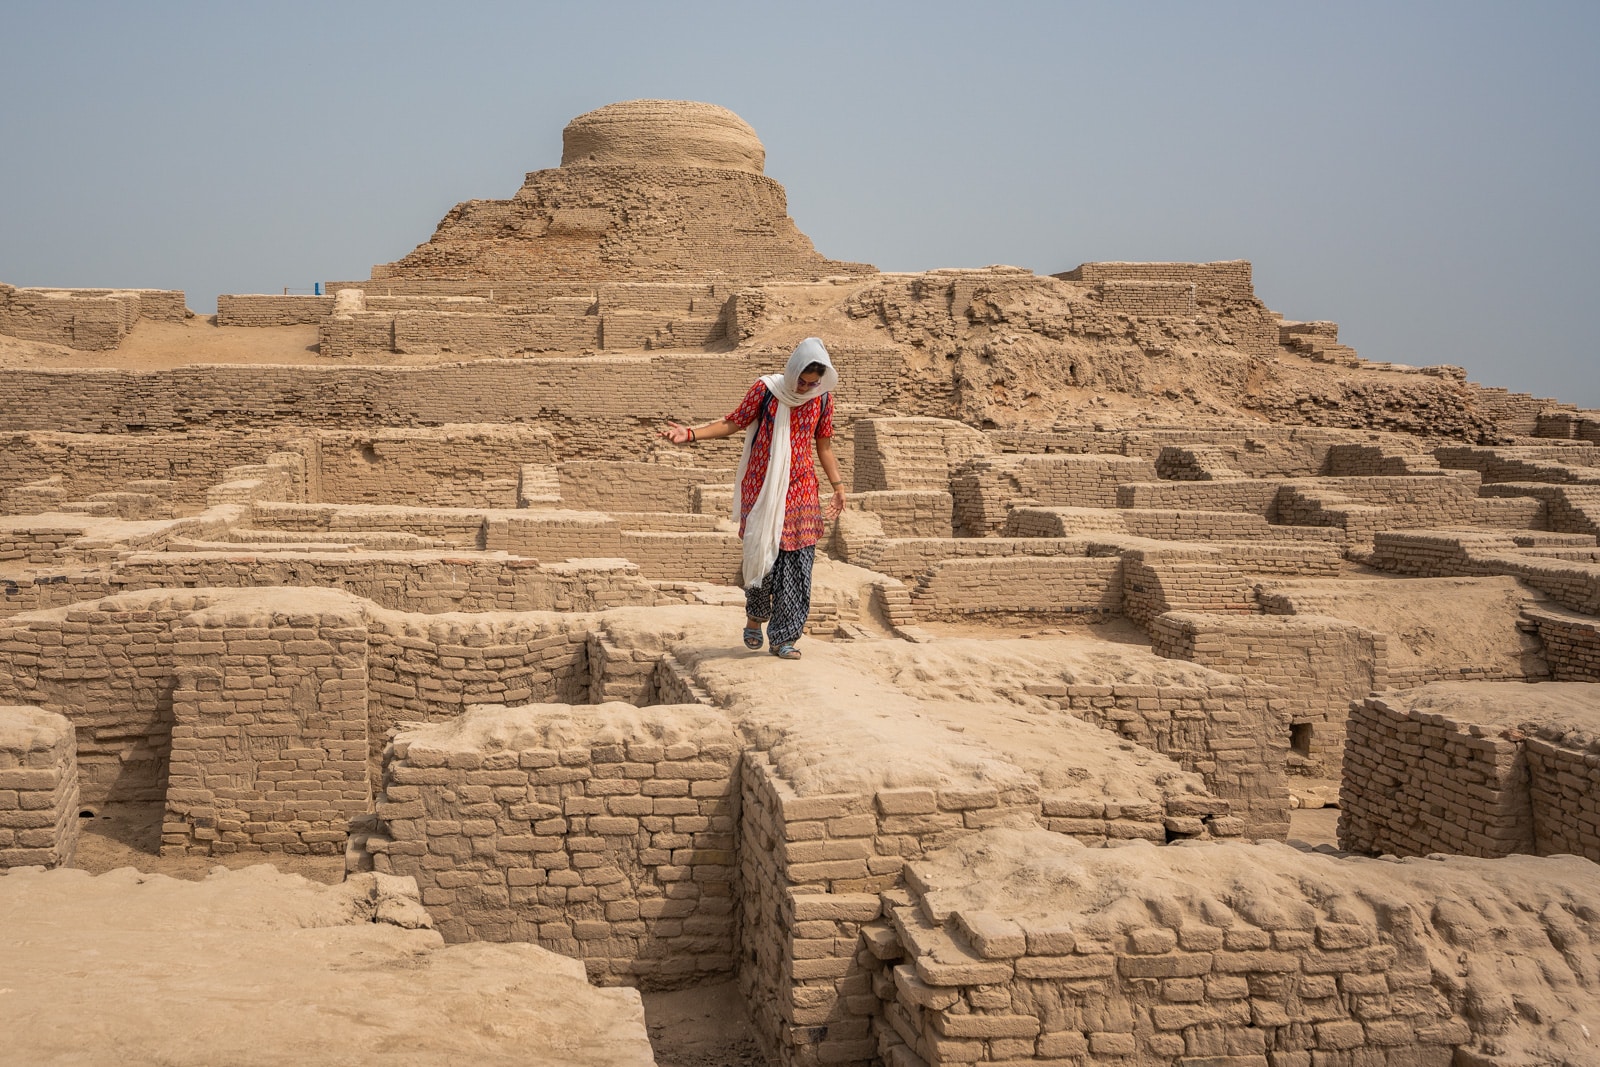 Sindh travel guide - Alex walking on the ruins in Moenjo Daro - Lost With Purpose travel blog